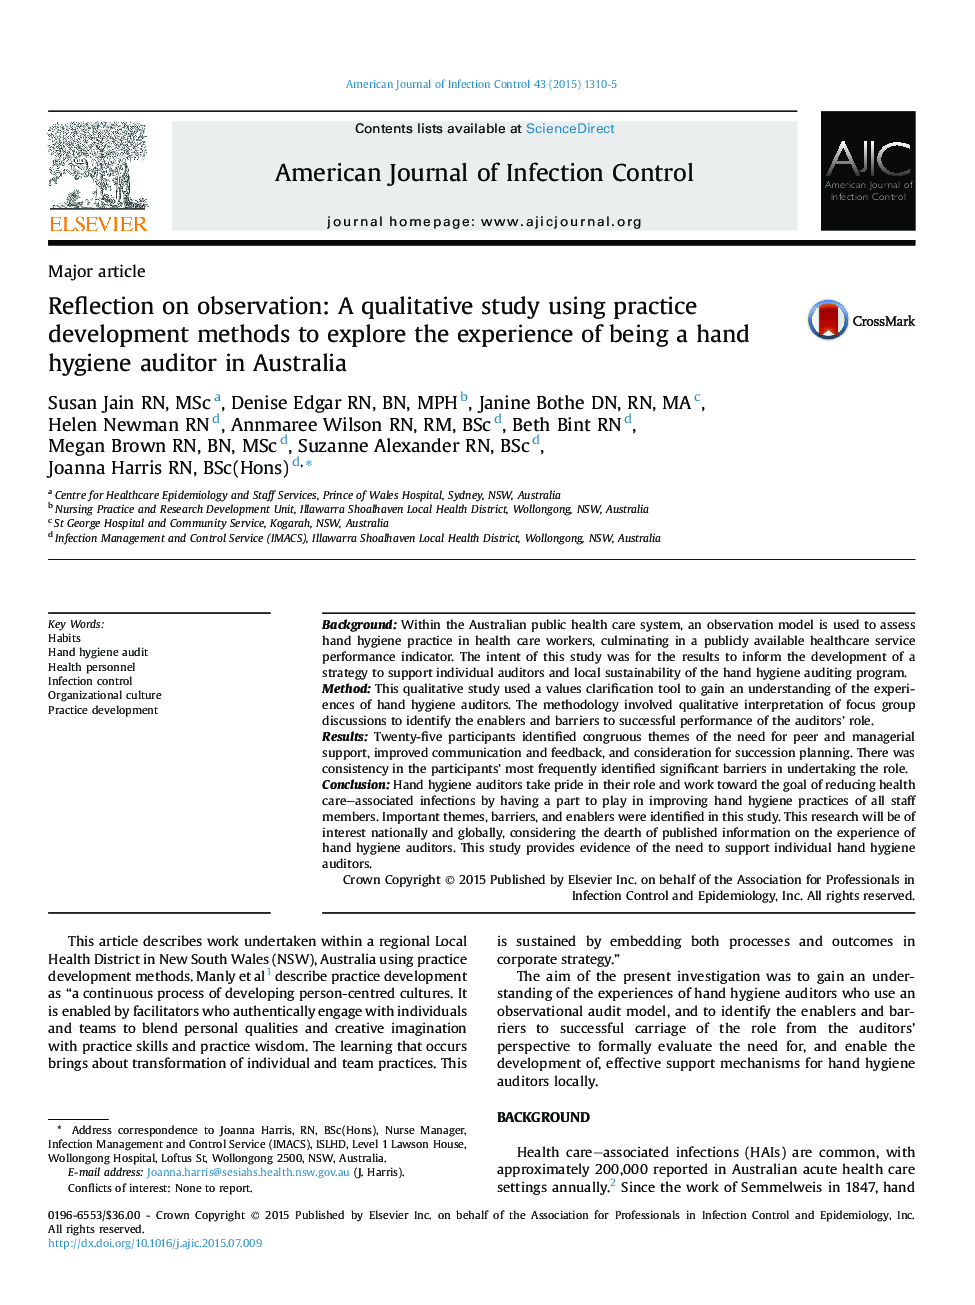 Major articleReflection on observation: A qualitative study using practice development methods to explore the experience of being a hand hygiene auditor in Australia